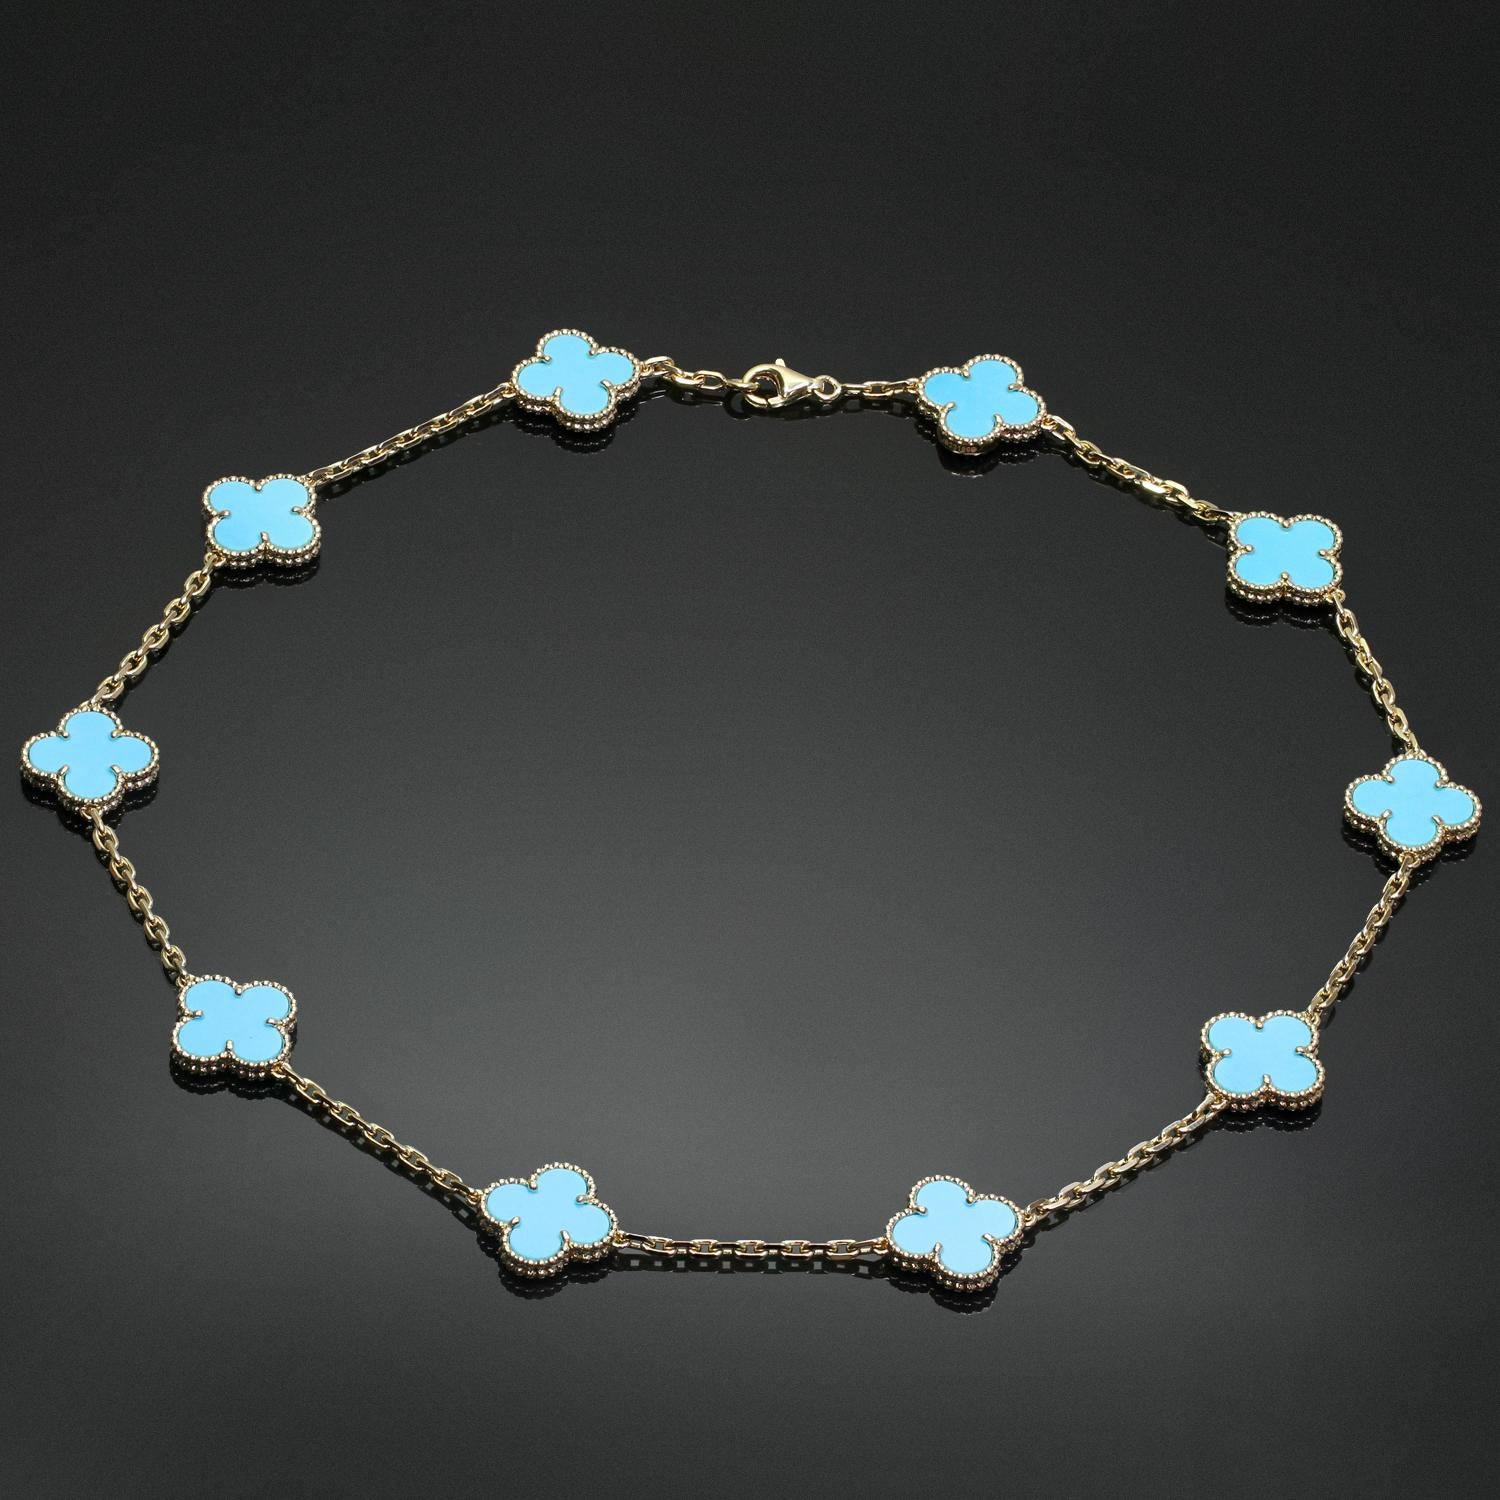 This classic Van Cleef & Arpels necklace from the iconic Vintage Alhambra collection is crafted in 18k yellow gold and features 10 lucky clover motifs inlaid with blue turquoise in round bead settings. Made in France circa 2010s. Measurements: 0.59